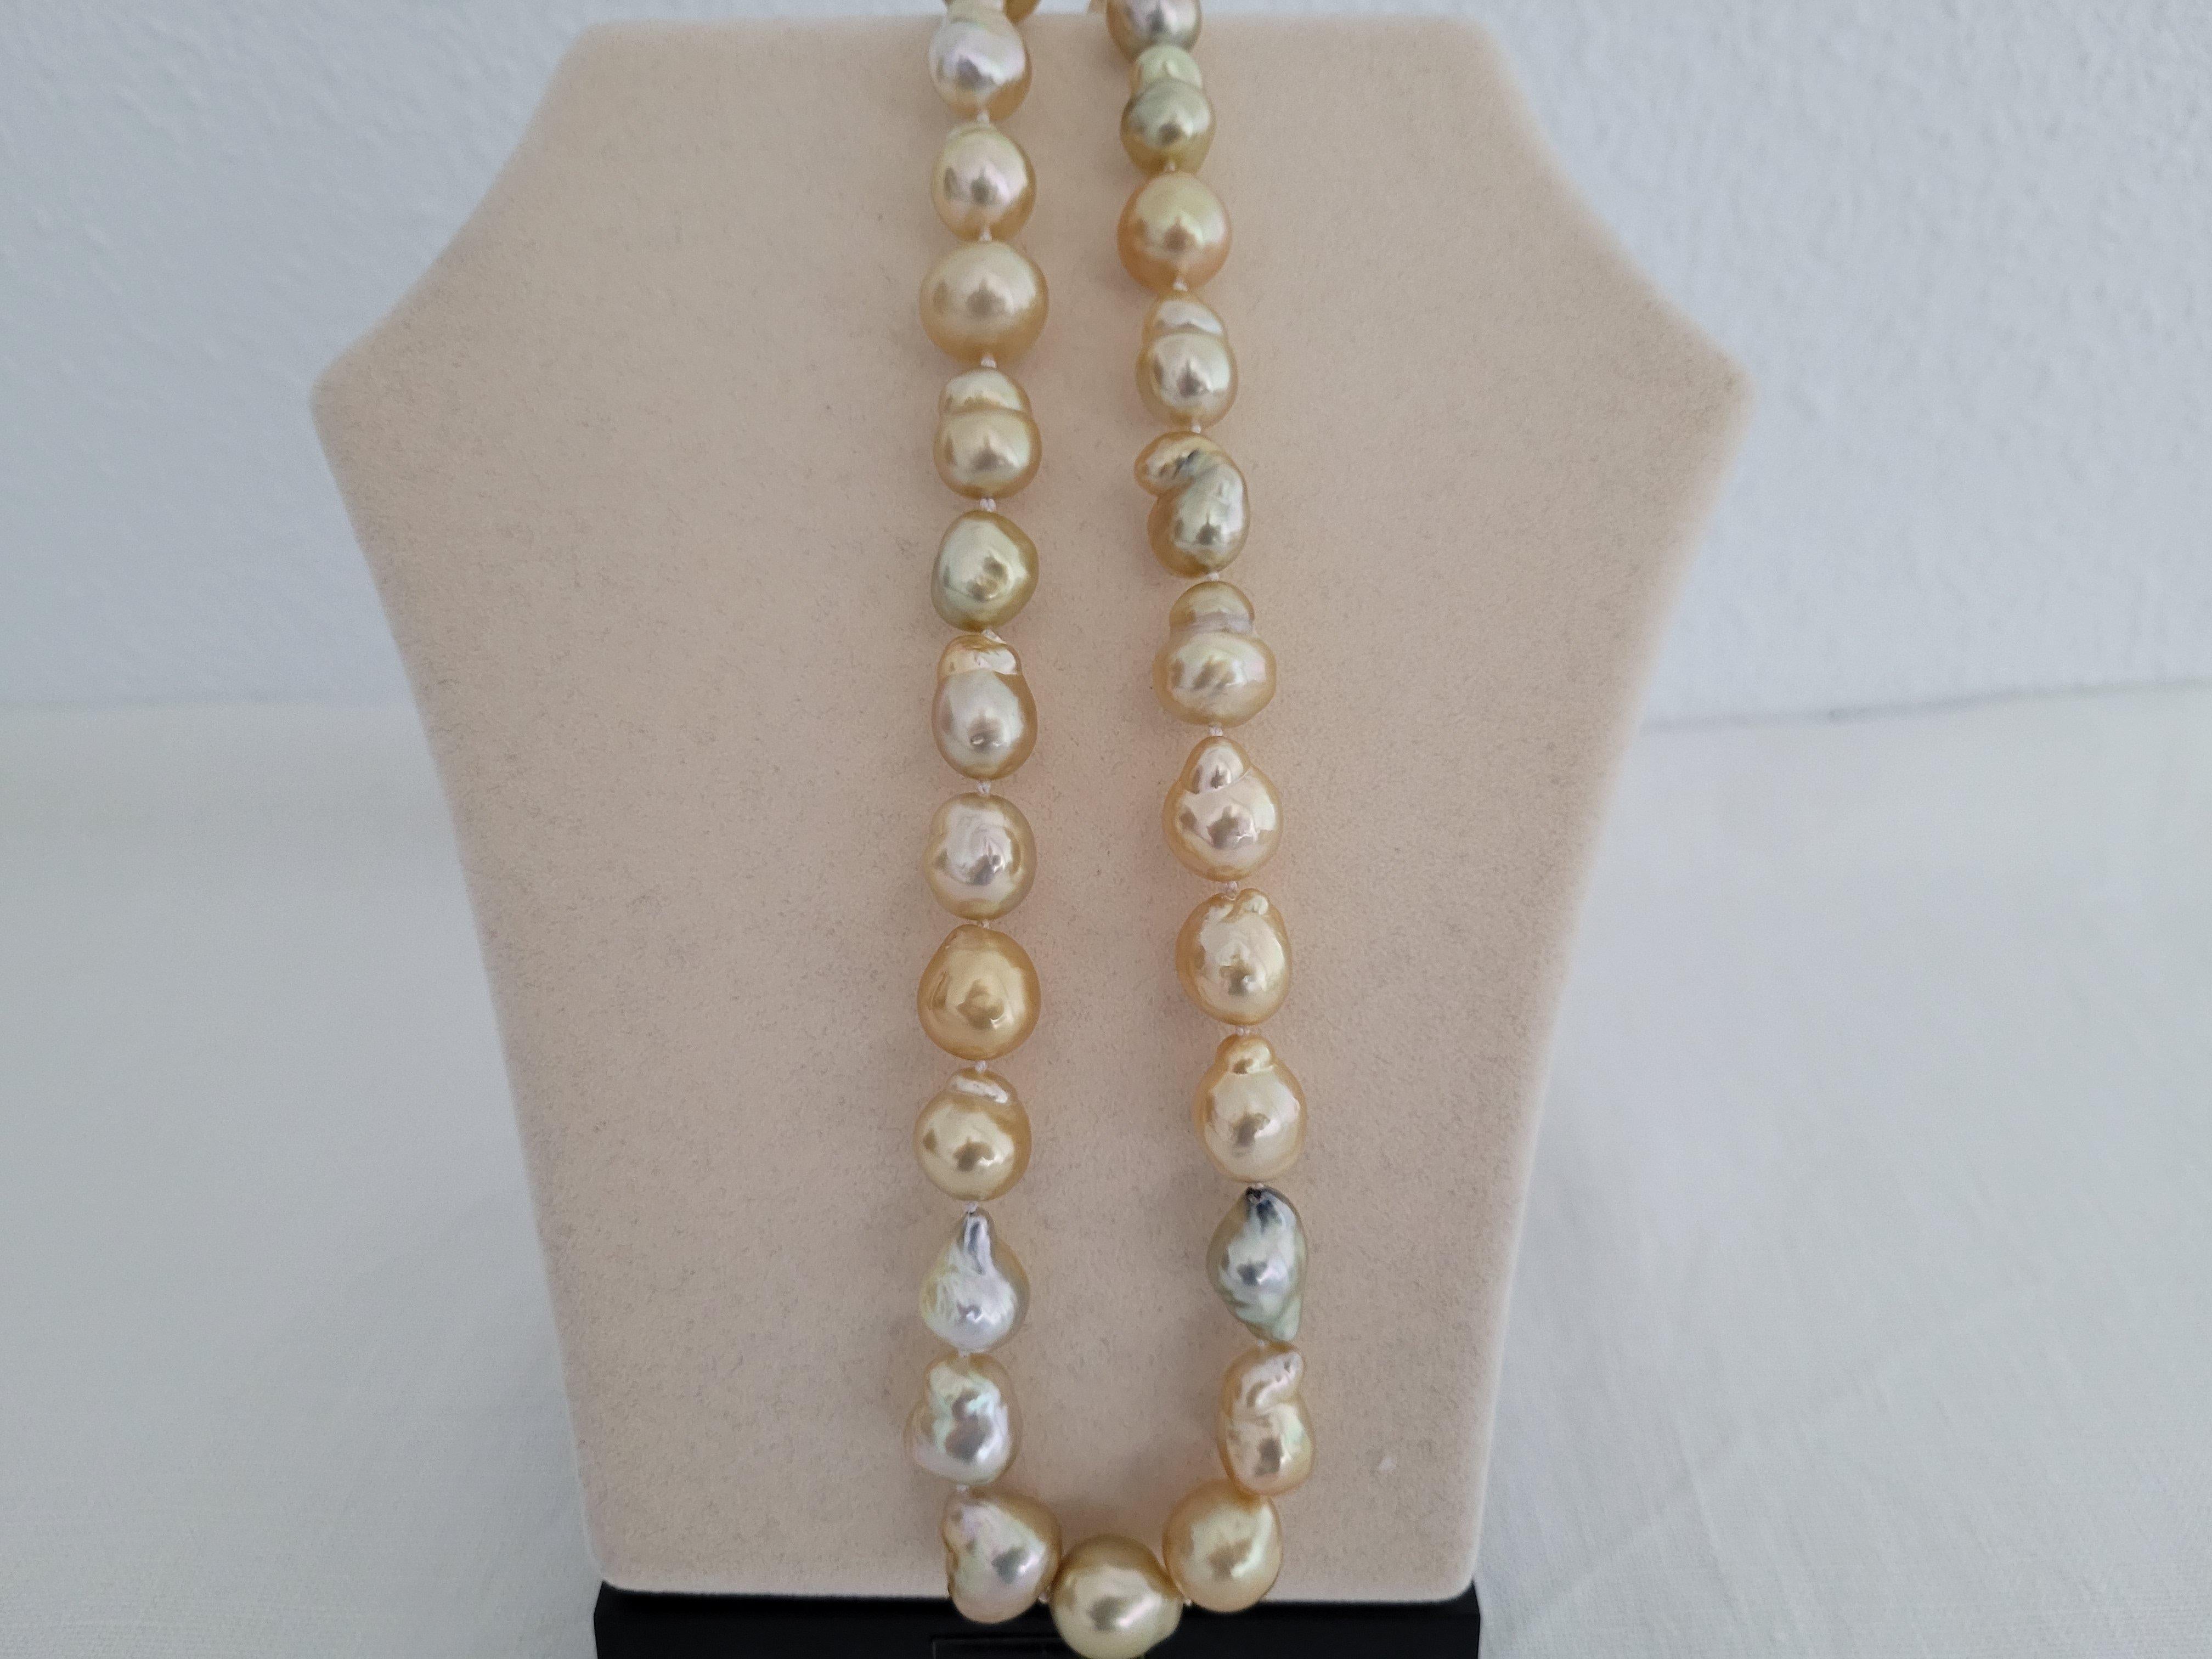 A Natural Color South Sea Pearls necklace of high quality.

- Size of Pearls 10-12 mm of diameter,

- Pearls from Pinctada Maxima Oyster

- Origin: Indonesia ocean waters

- Natural Color pearls Deep Golden 

- Very High Natural luster and orient

-